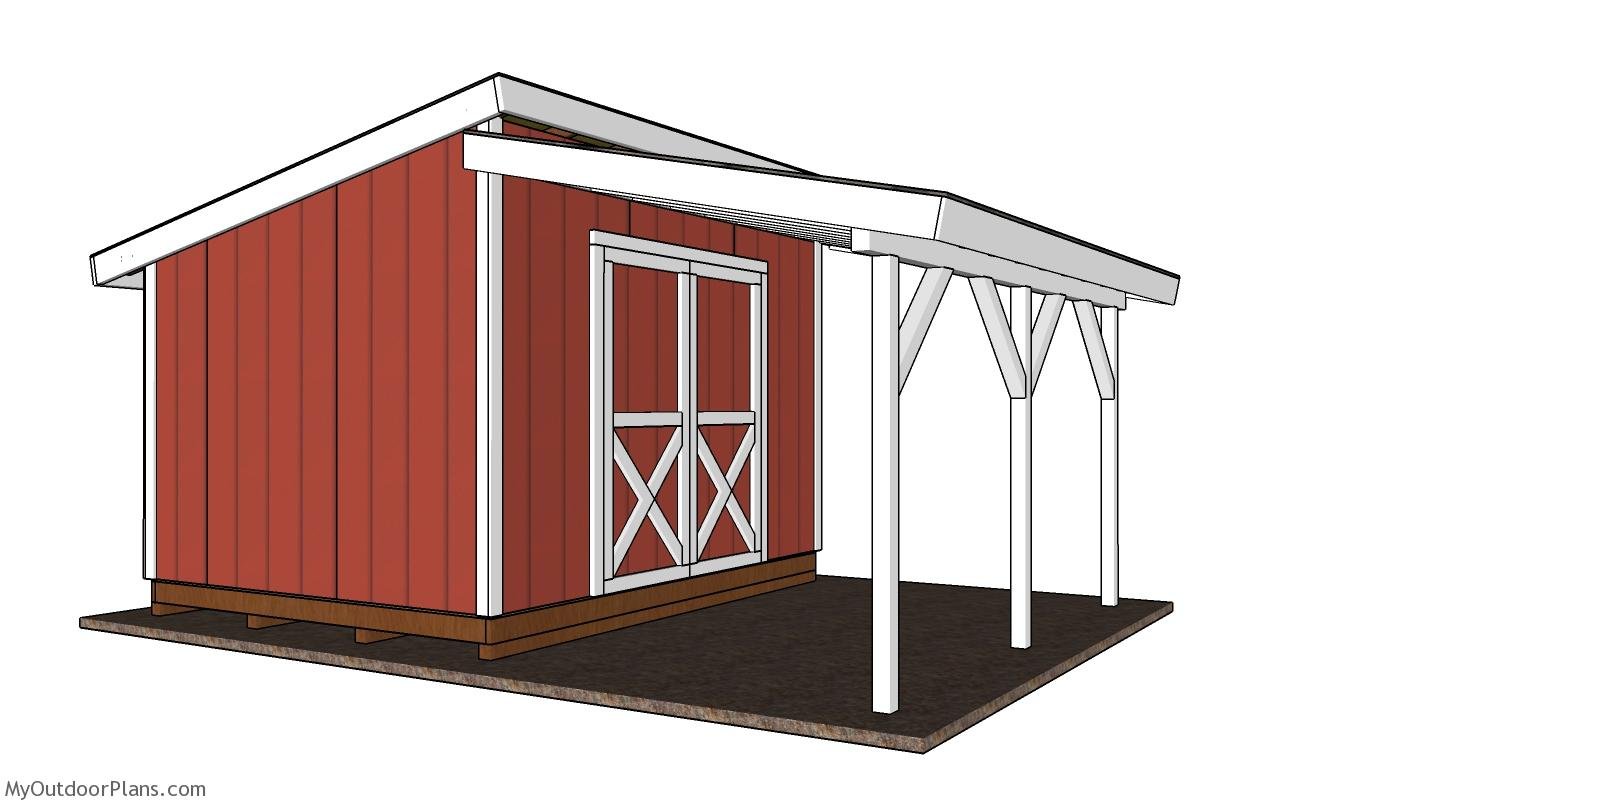 How to Add a Porch to a Shed